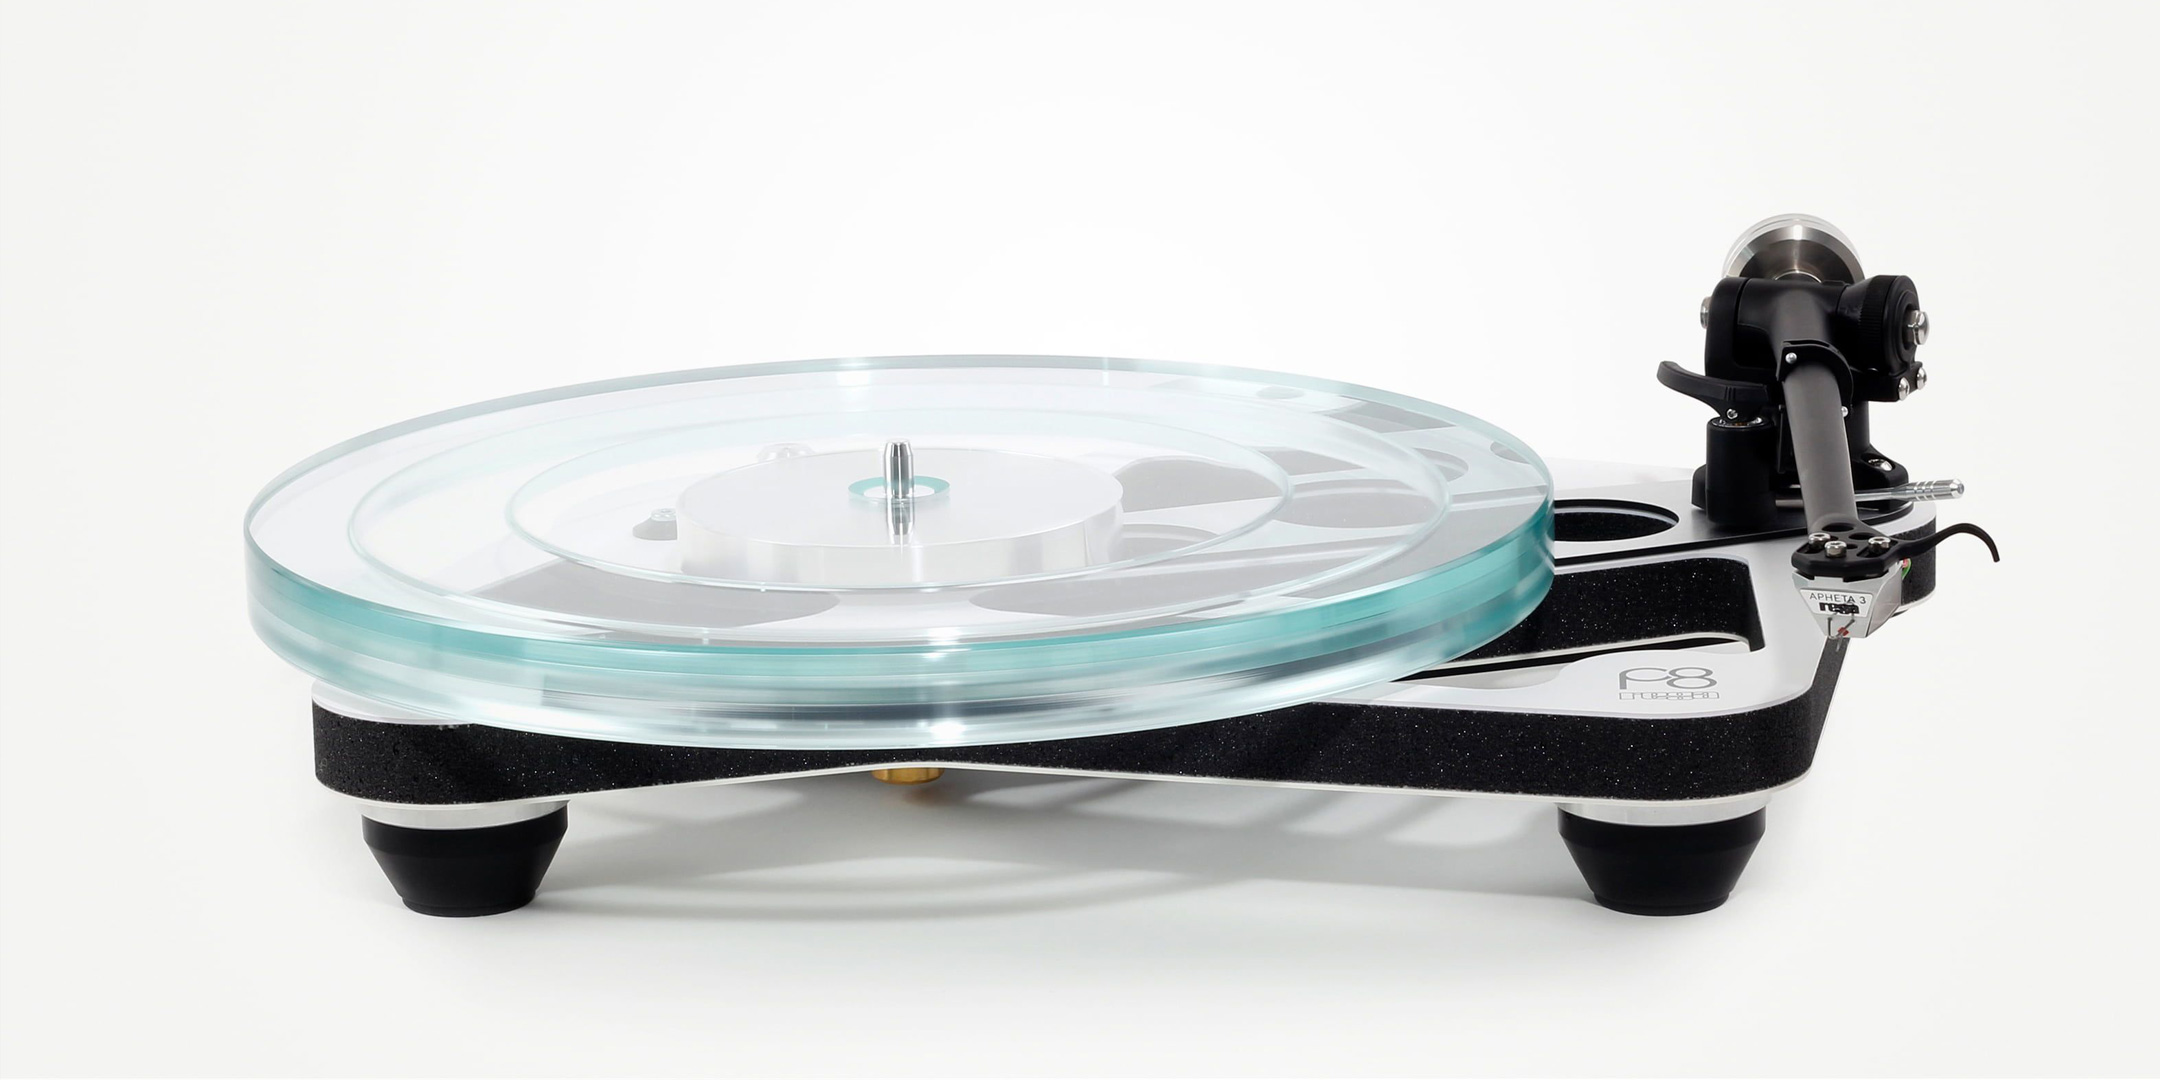 Pic showing a Rega Planar 8 Turntable without slipmat on a white background